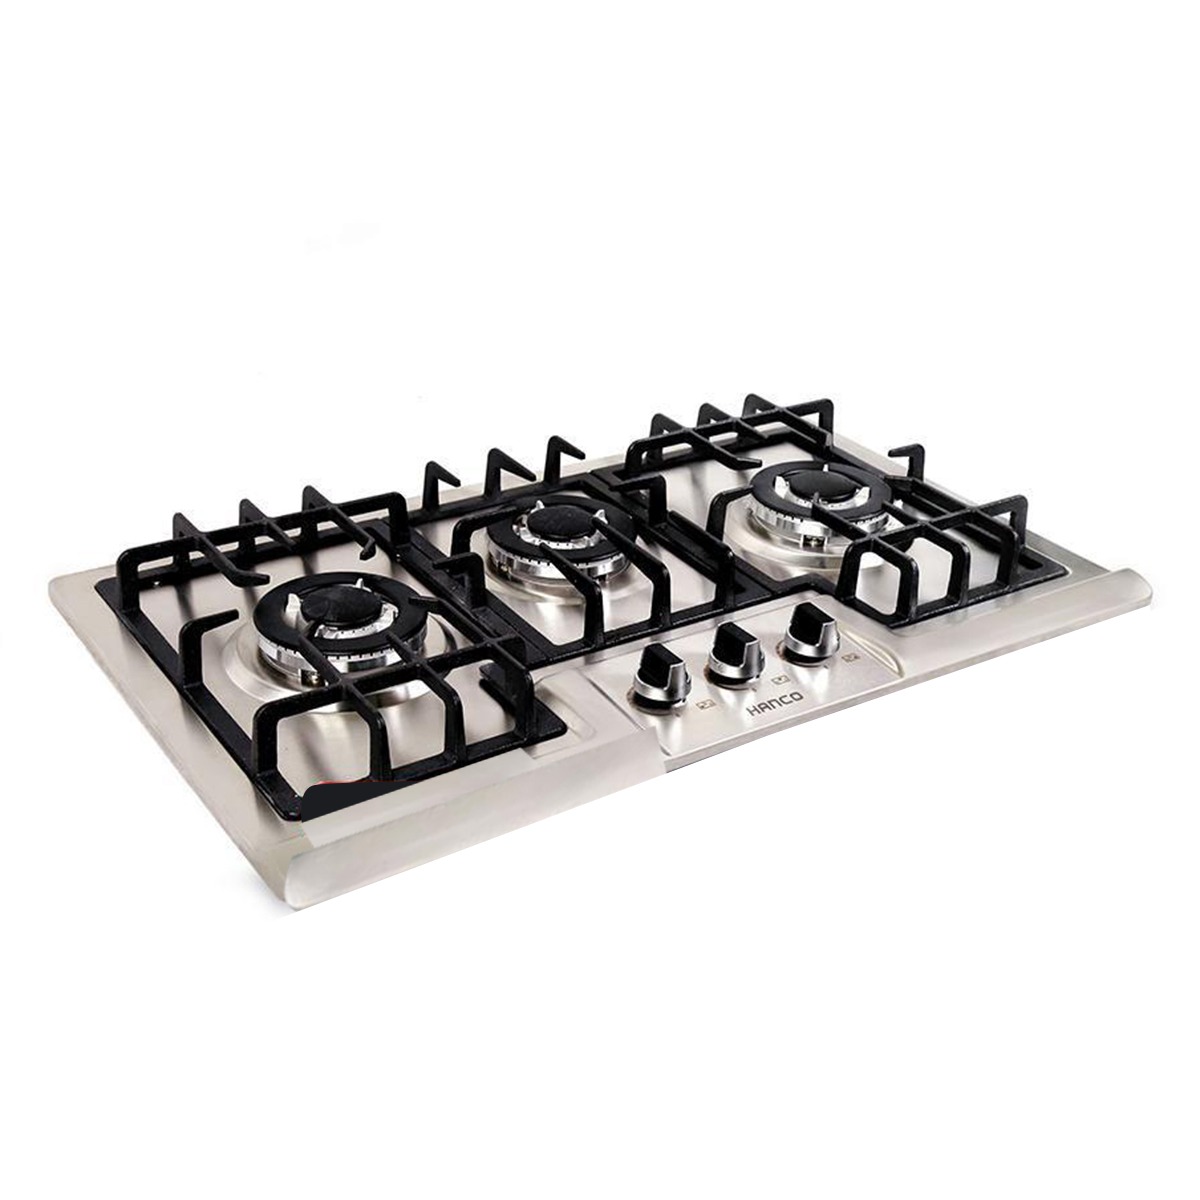 Hanco Stainless Steel Hob With Triple Ring Big Sabaf Burners (model 781) - Auto Ignition Stove